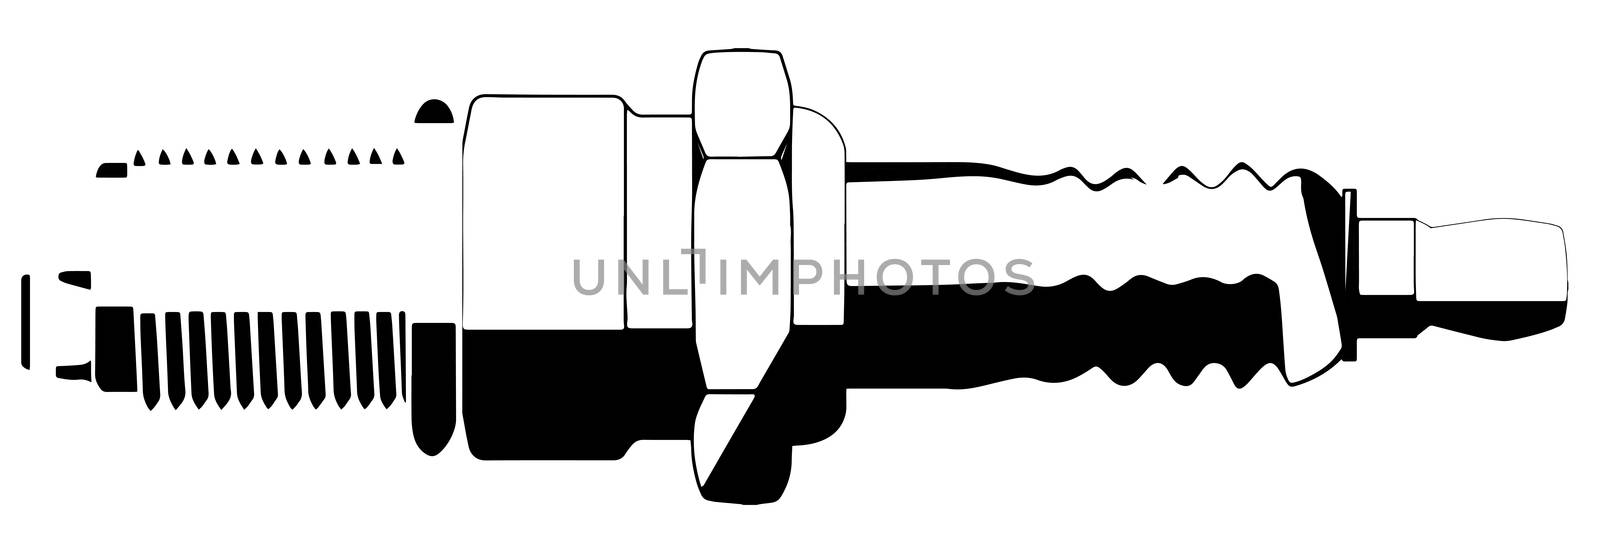 A black and white drawing of a spark plug isolated on a white background